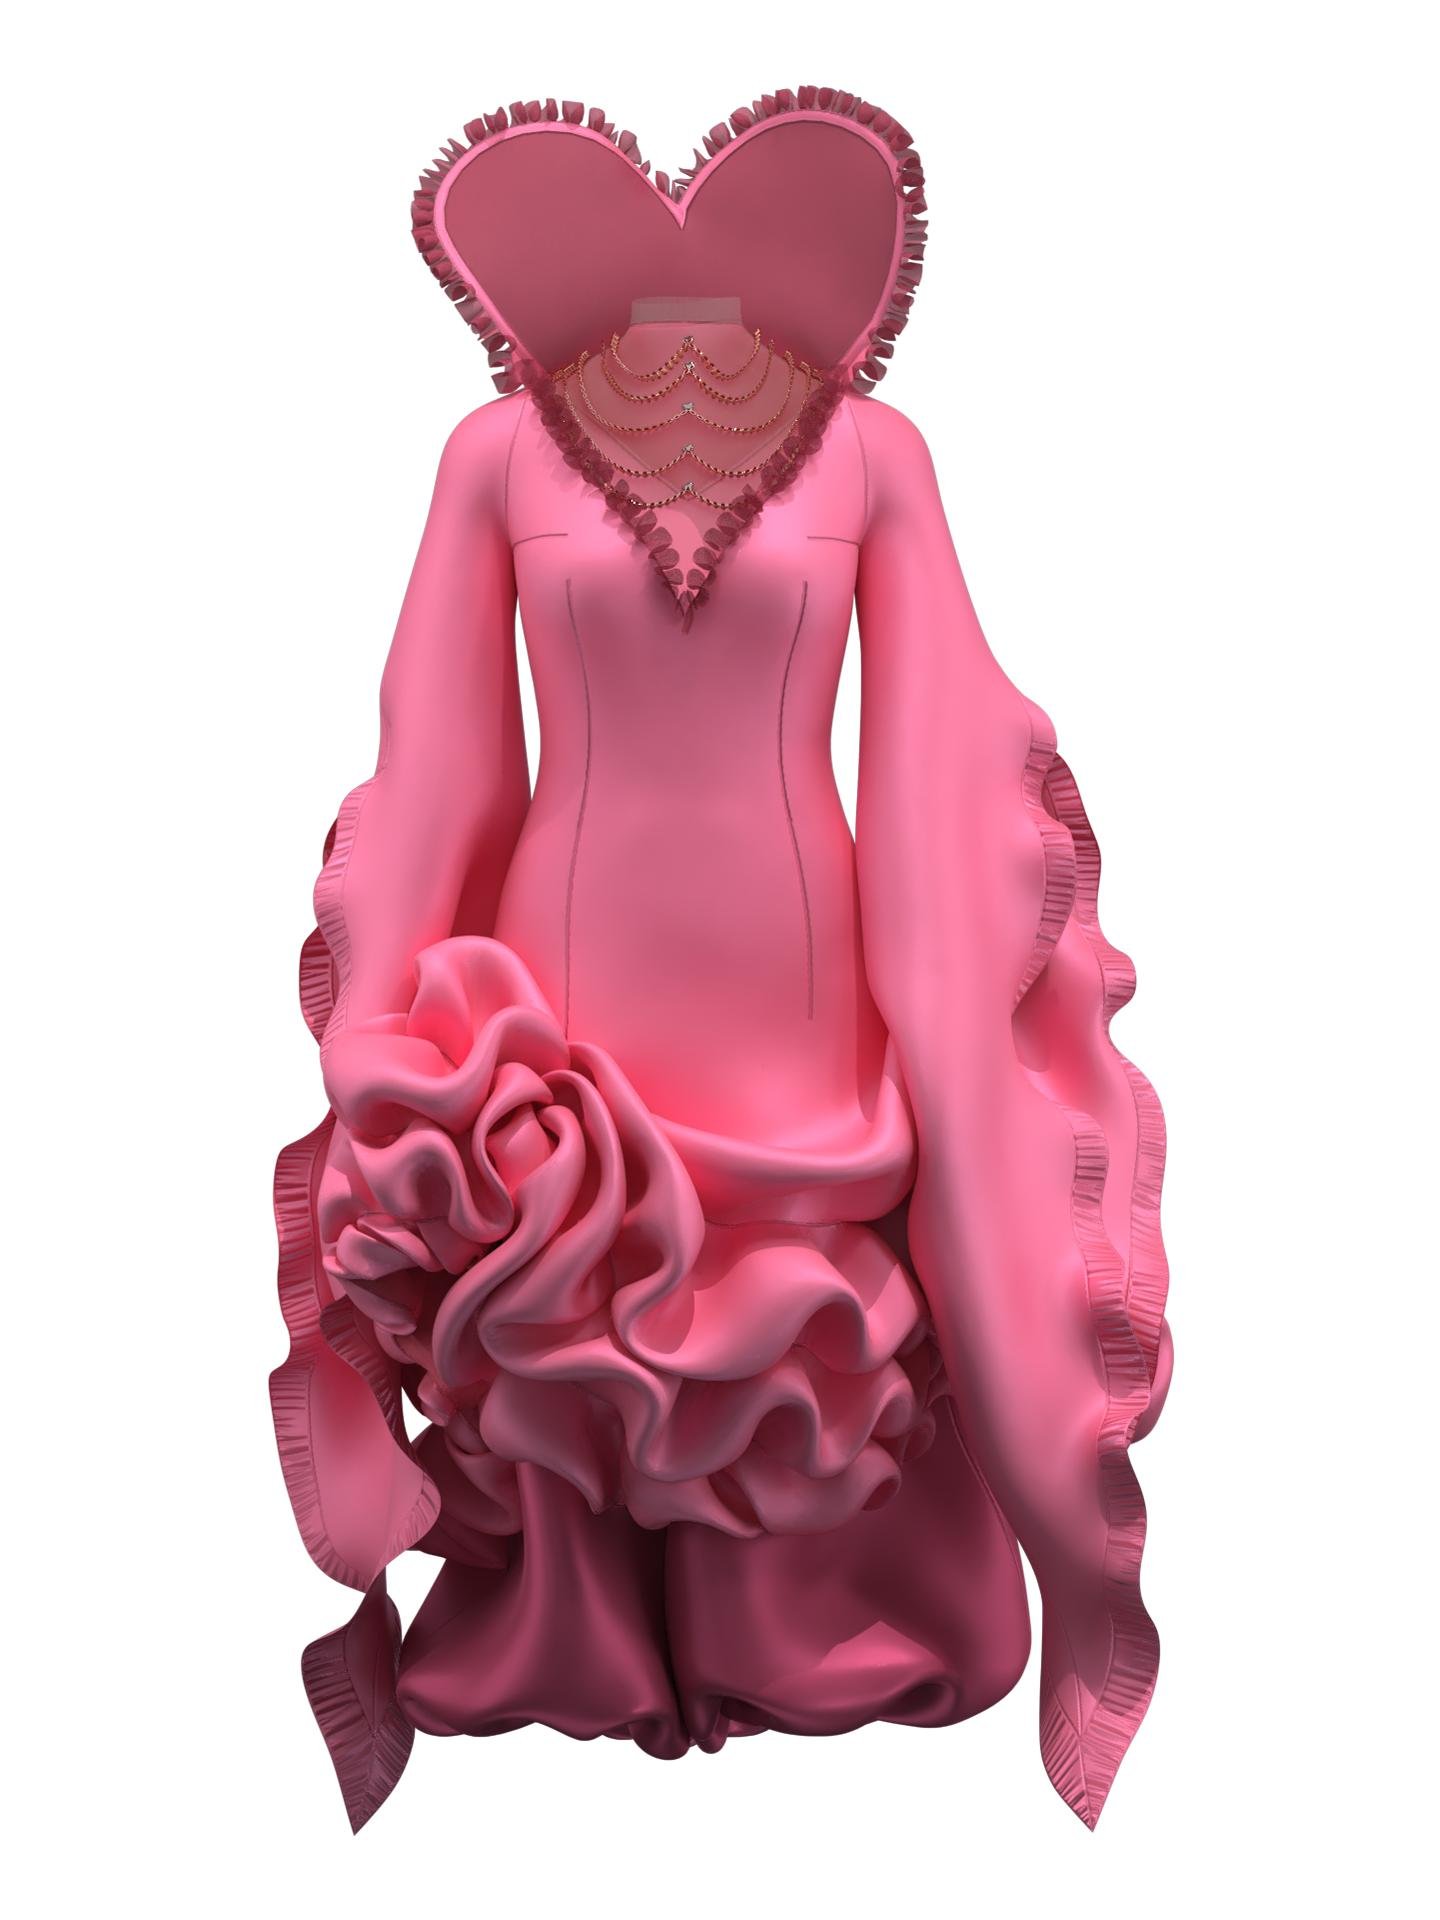 Queen of hearts dress in pink by ANUK